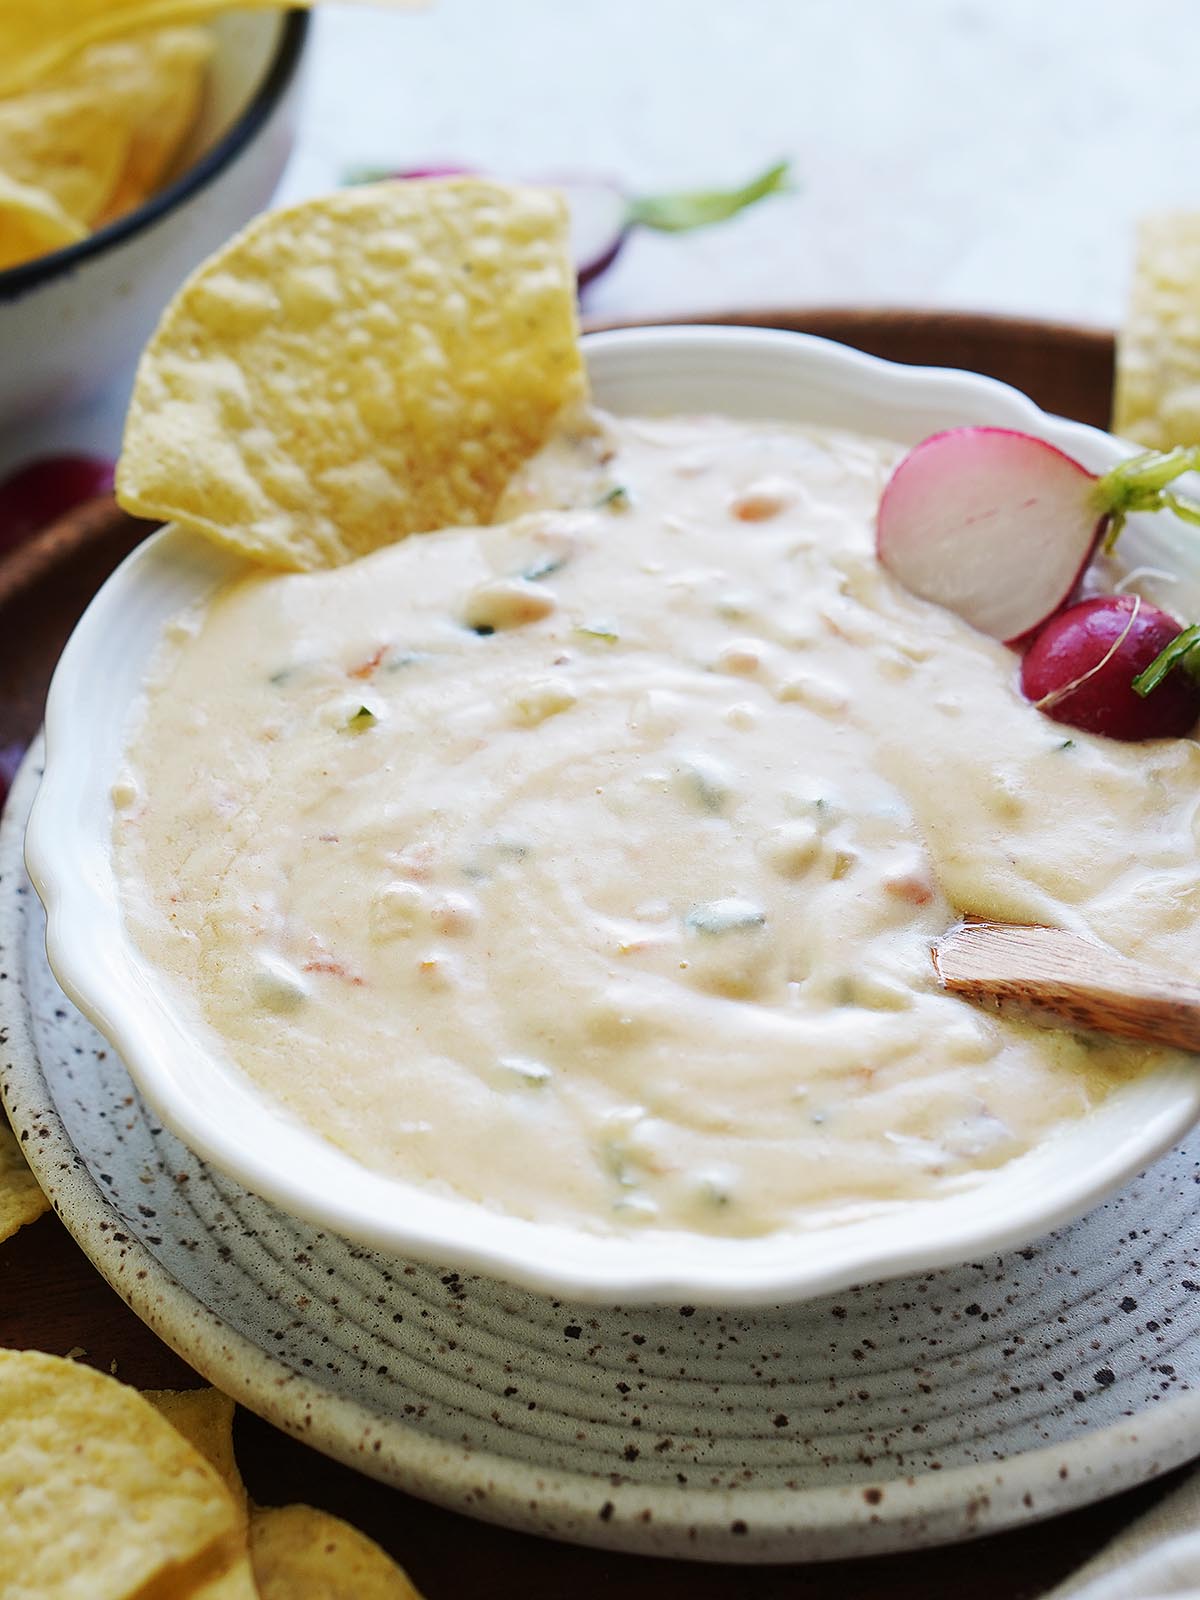 Queso dip in a white bowl with tortilla chips on the side.